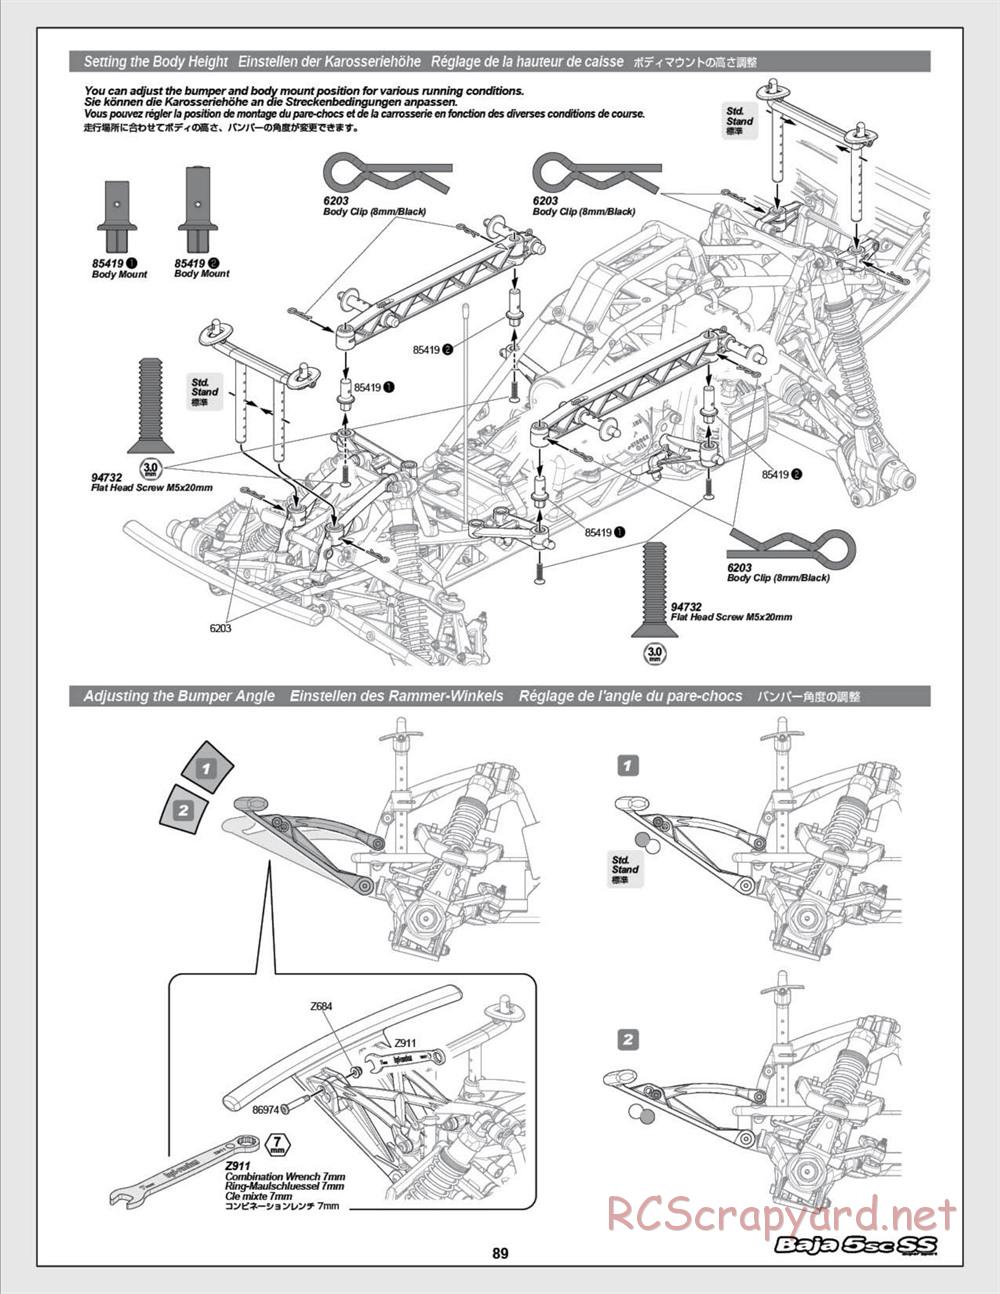 HPI - Baja 5SC SS - Exploded View - Page 89